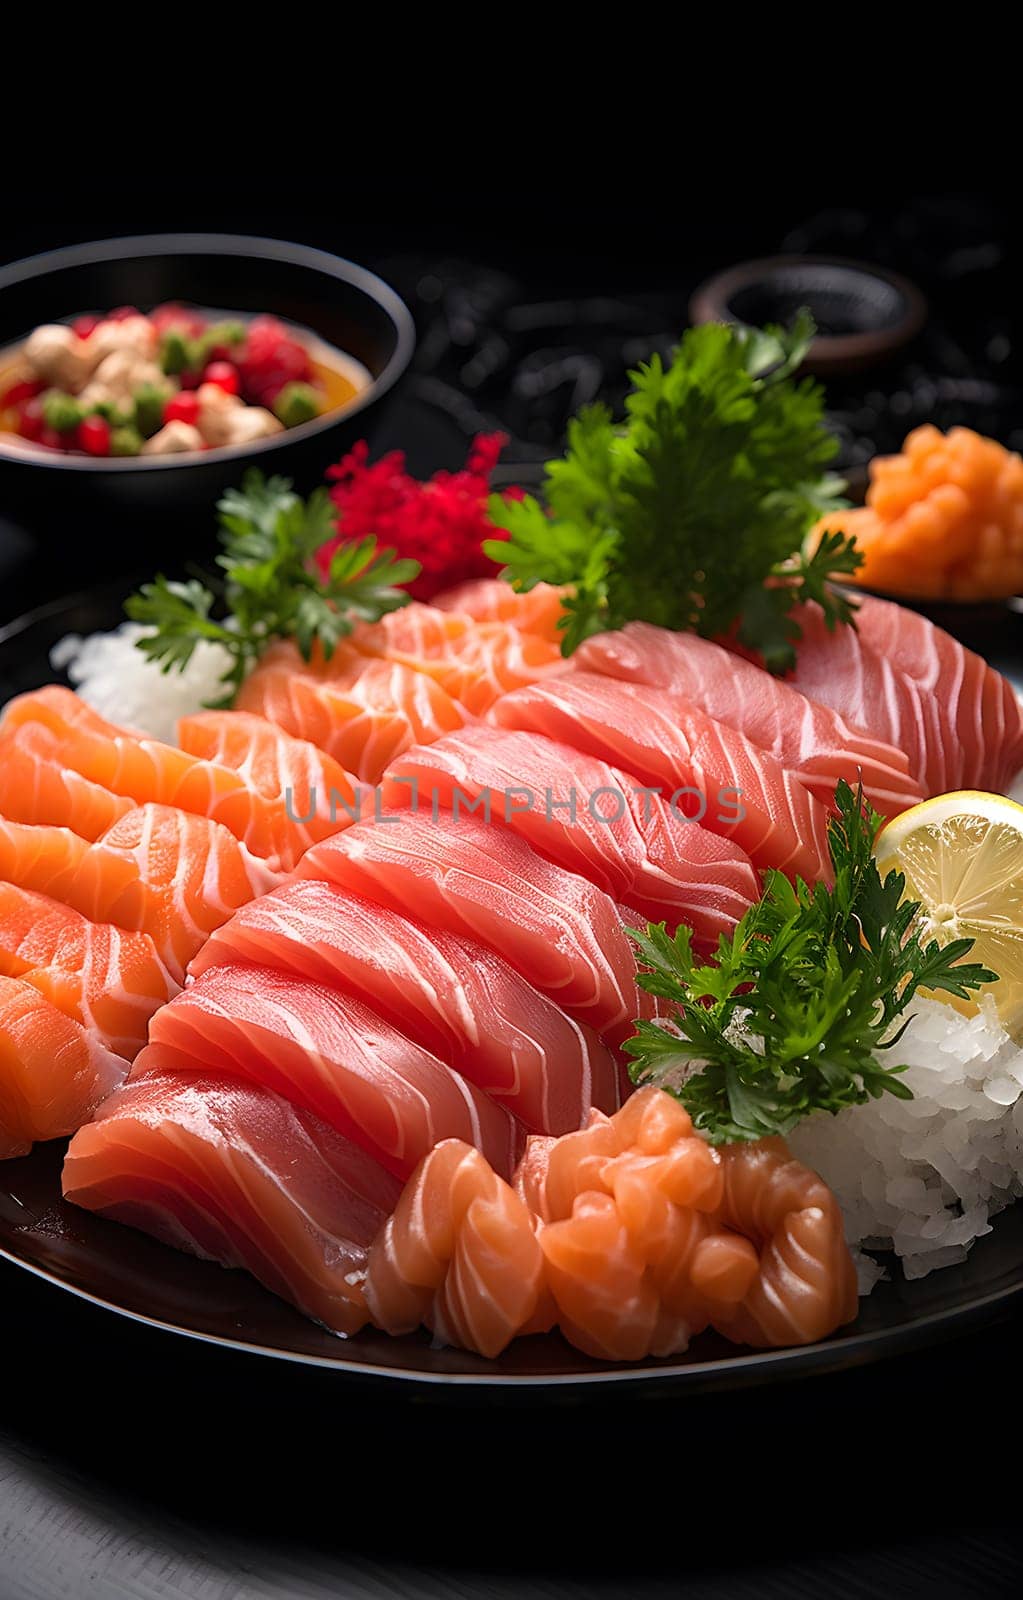 A vibrant platter of sashimi and sushi, adorned with delicate slices of salmon and garnished with fresh herbs, invites the senses to indulge in a raw and exquisite feast fit for a king, surrounded by the cozy ambiance of an indoor setting